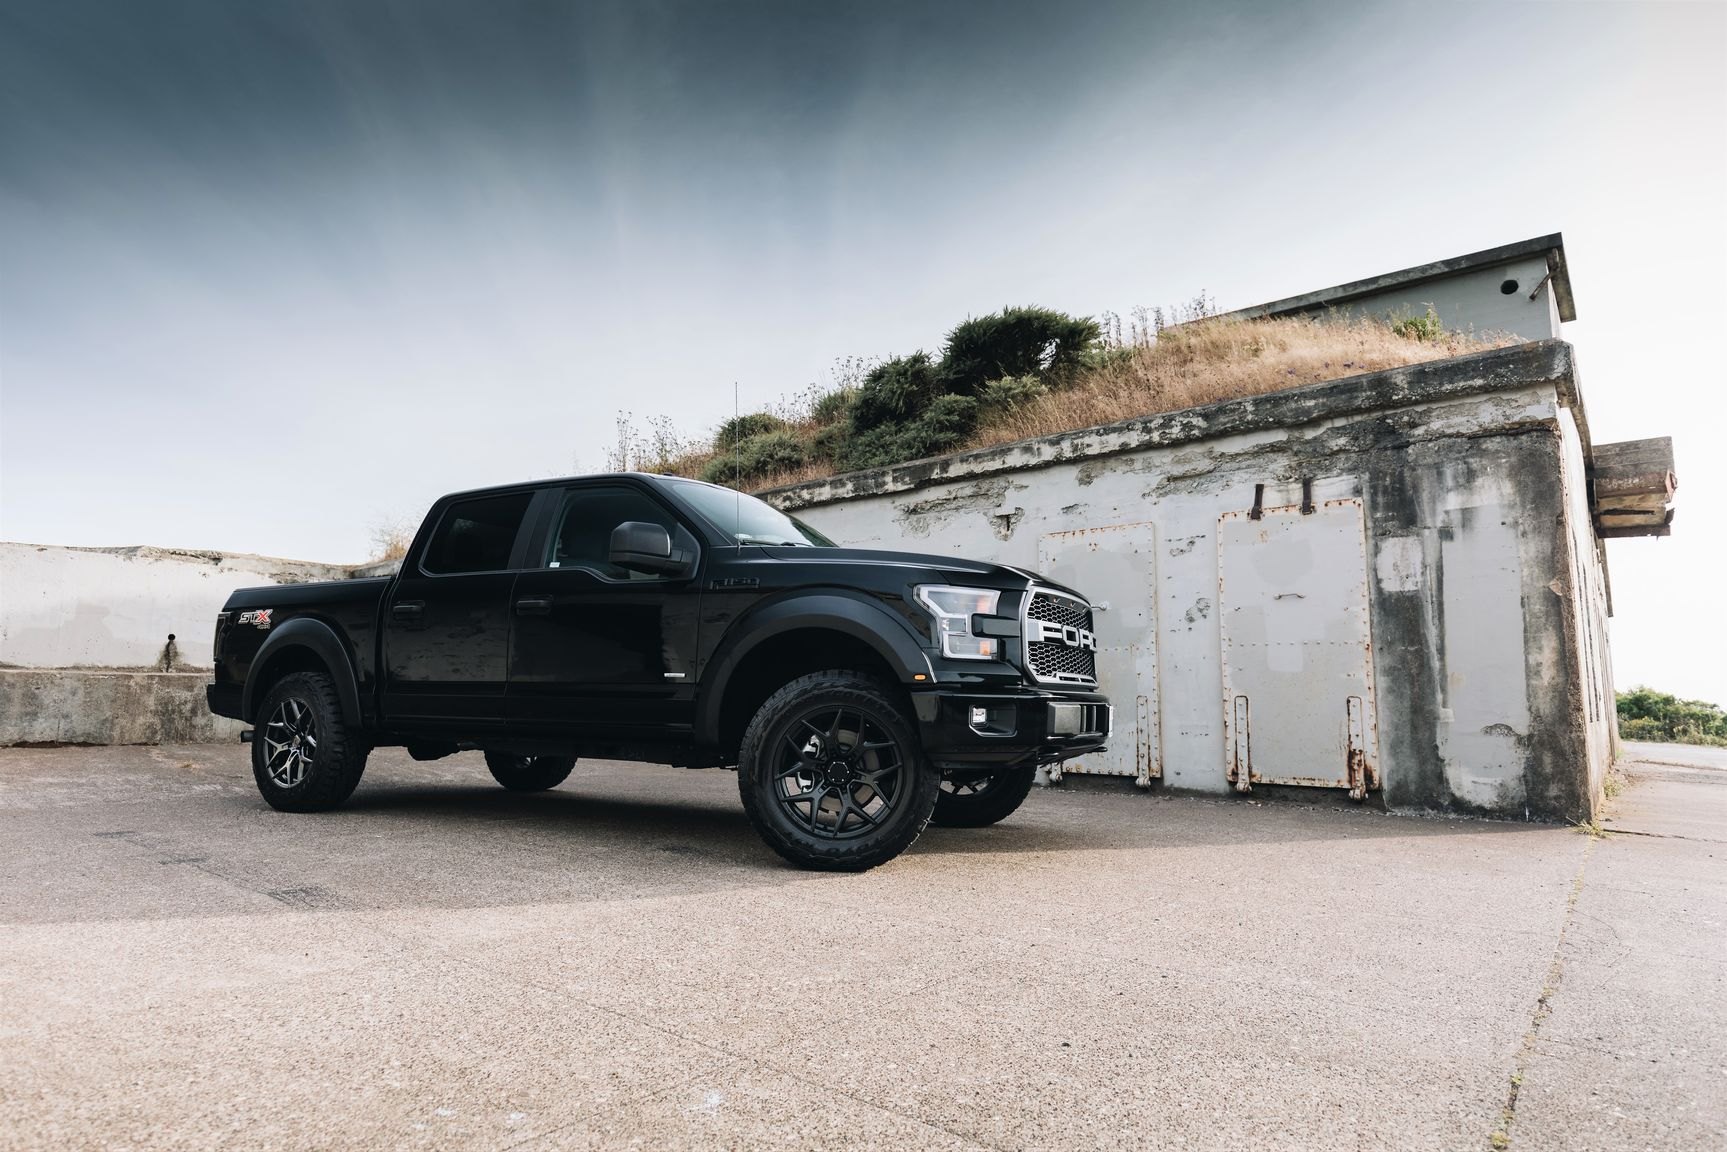 Black Lifted Ford F-150 with Aftermarket Headlights - Photo by Venom Rex